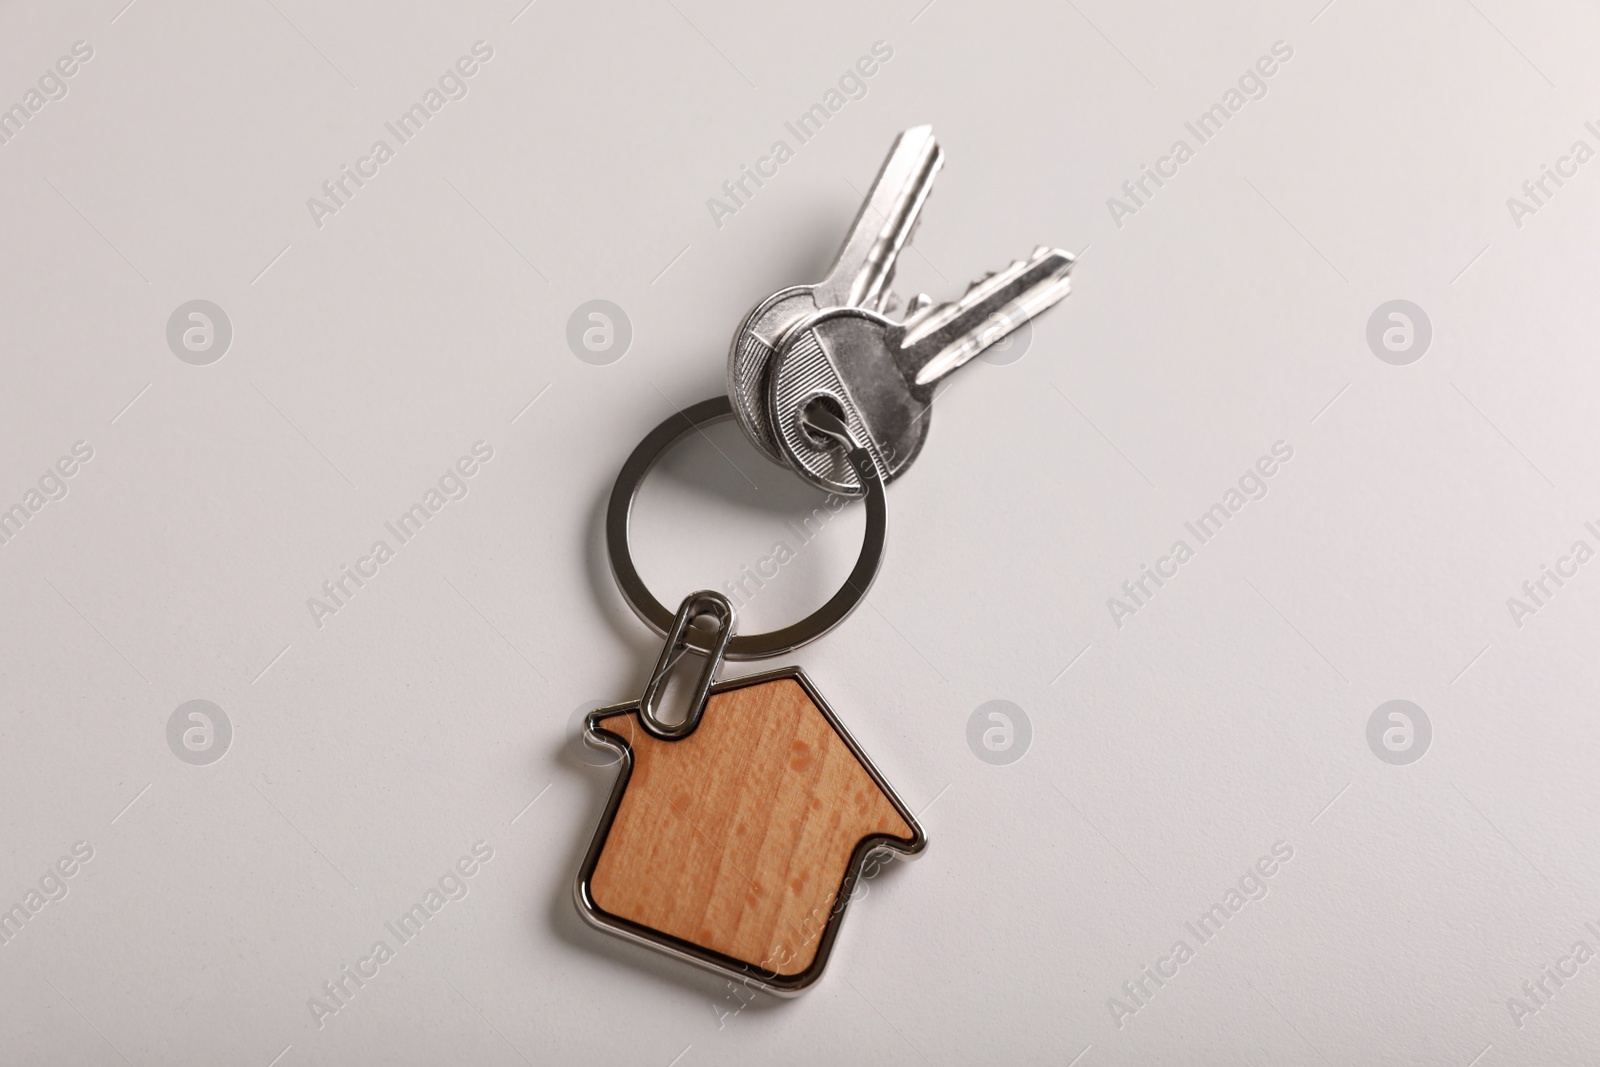 Photo of Keys with trinket in shape of house on white background, top view. Real estate agent services